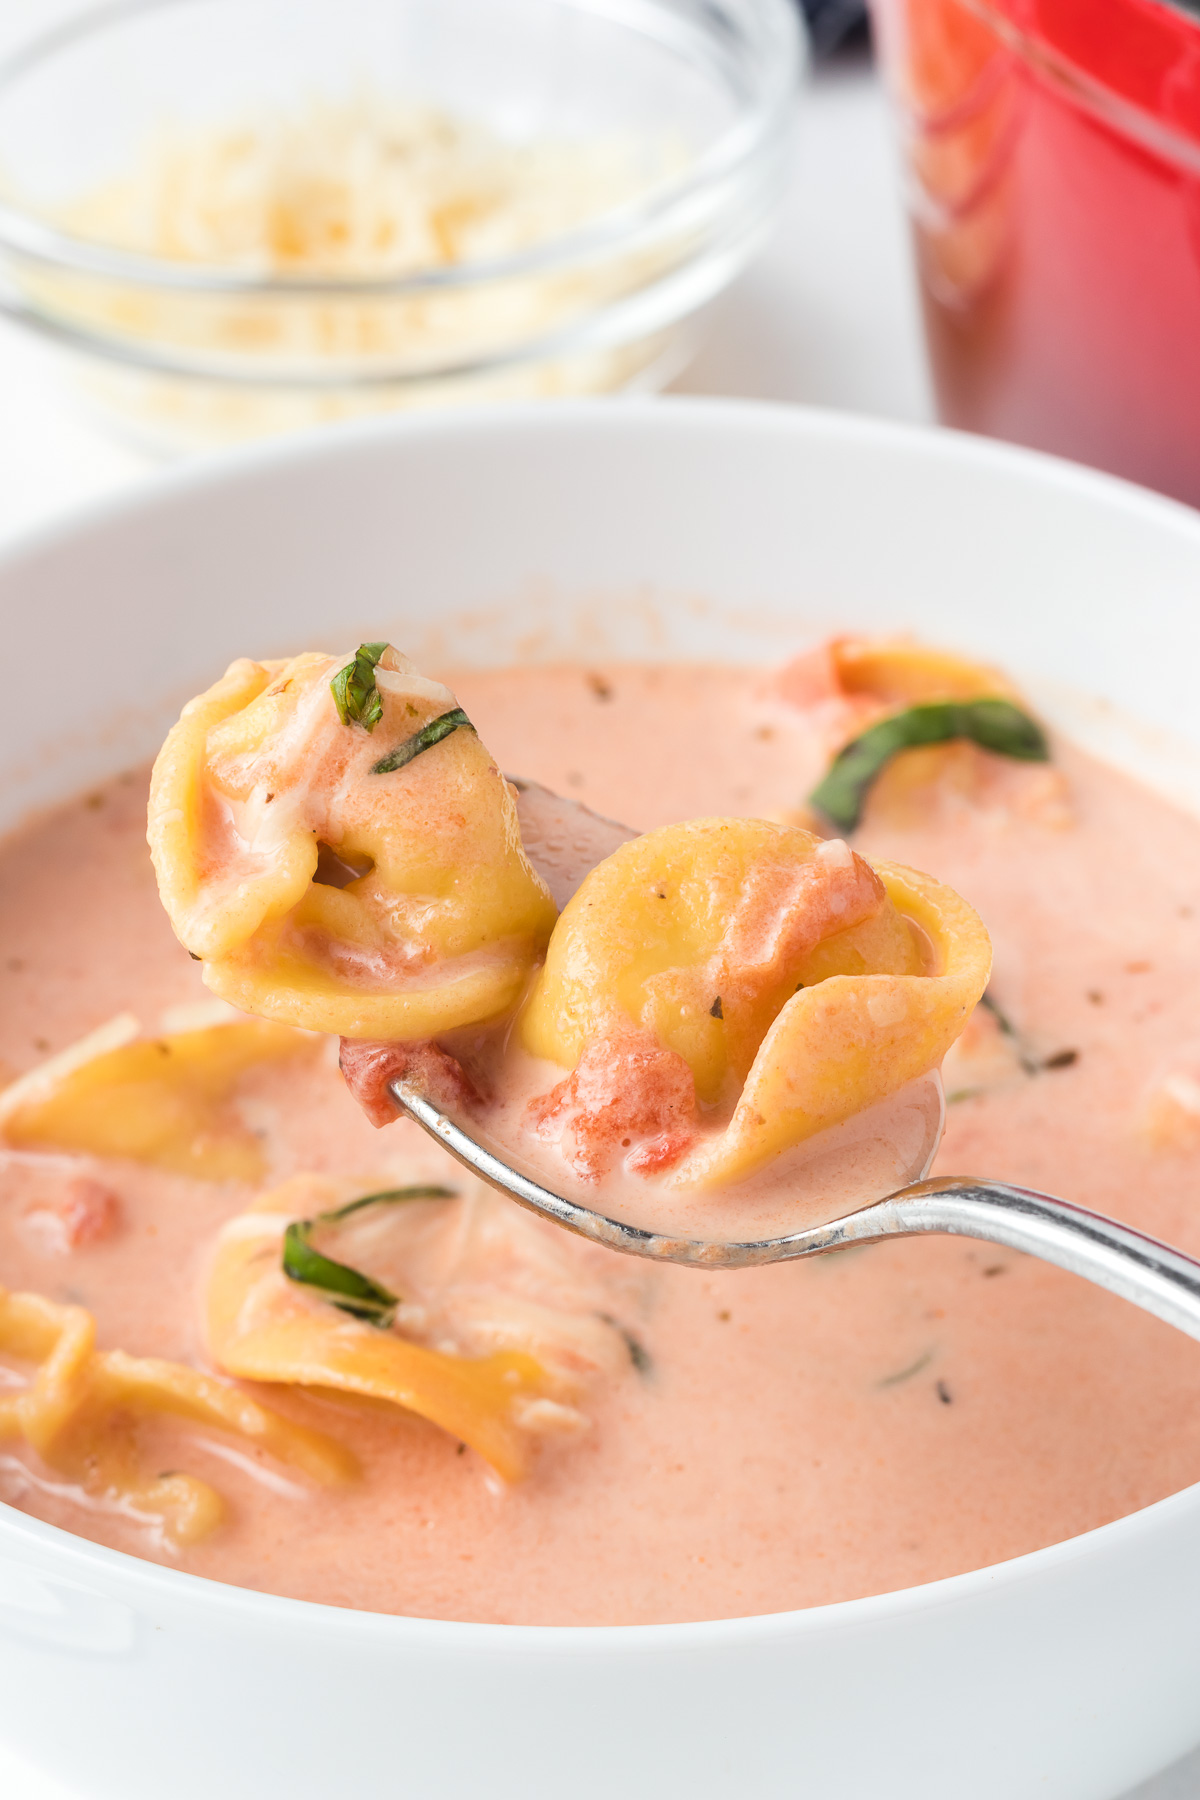 Serve up a bowl of this easy Tomato Tortellini Bisque for a warm, comforting meal on a cold winter evening. With a creamy sauce, rich tomato flavor, and spoonfuls of cheesy pasta, you can’t go wrong with this savory soup! Plus, it’s fast and easy enough to make for an easy weeknight meal. via @foodhussy